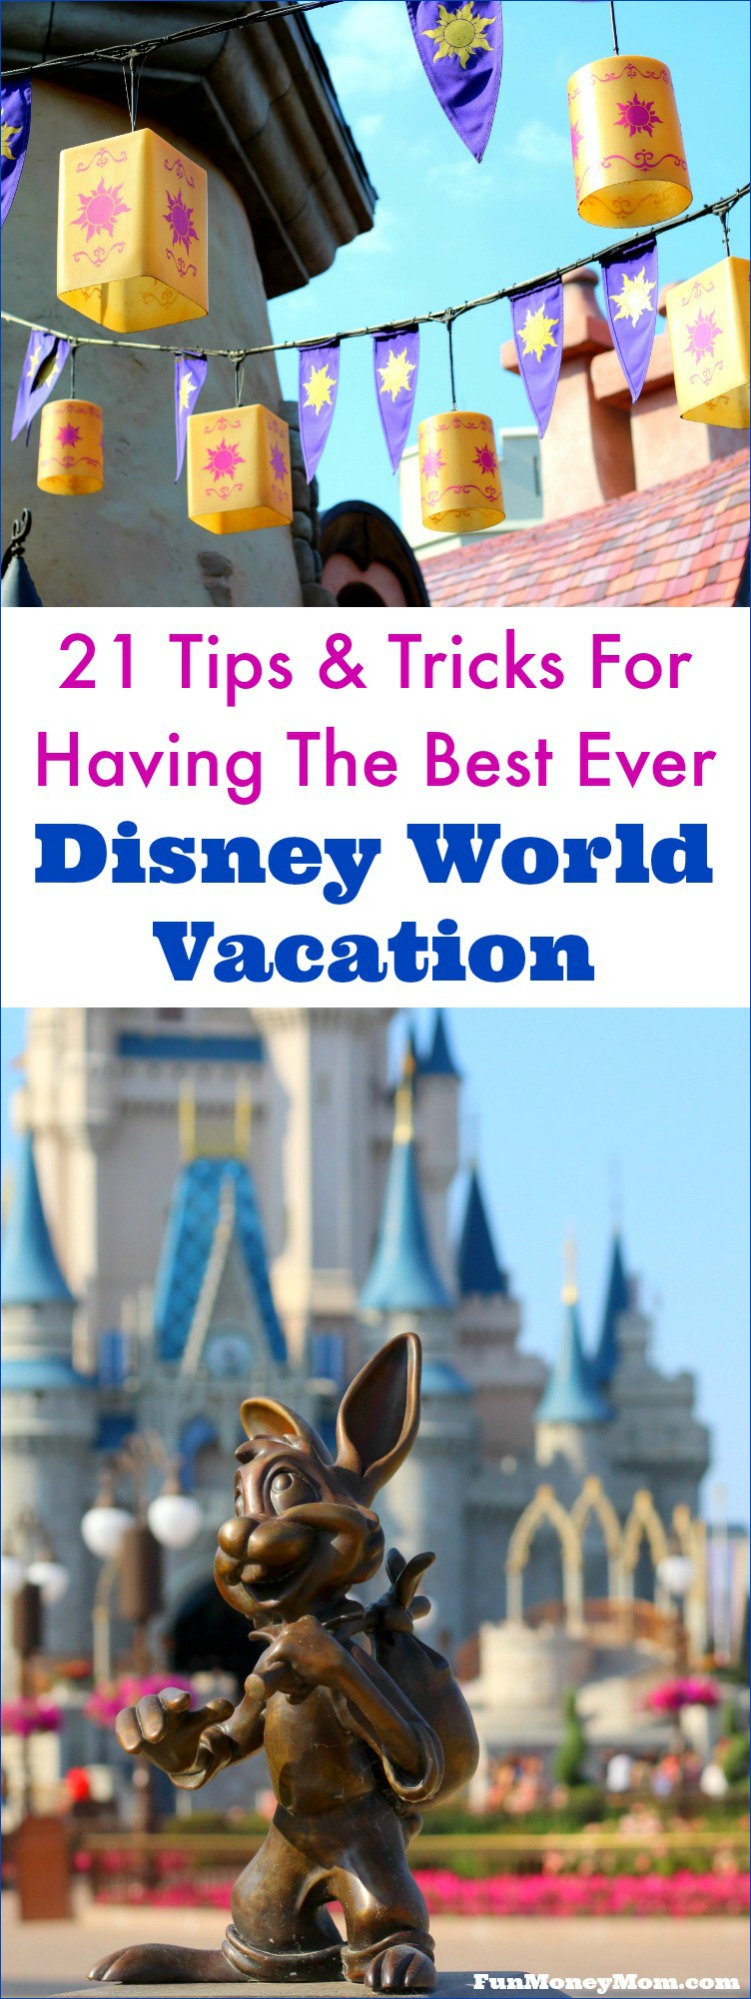 Want to have the best Disney World vacation ever? Use these 21 tips and tricks for navigating Disney and you'll have a magical time!